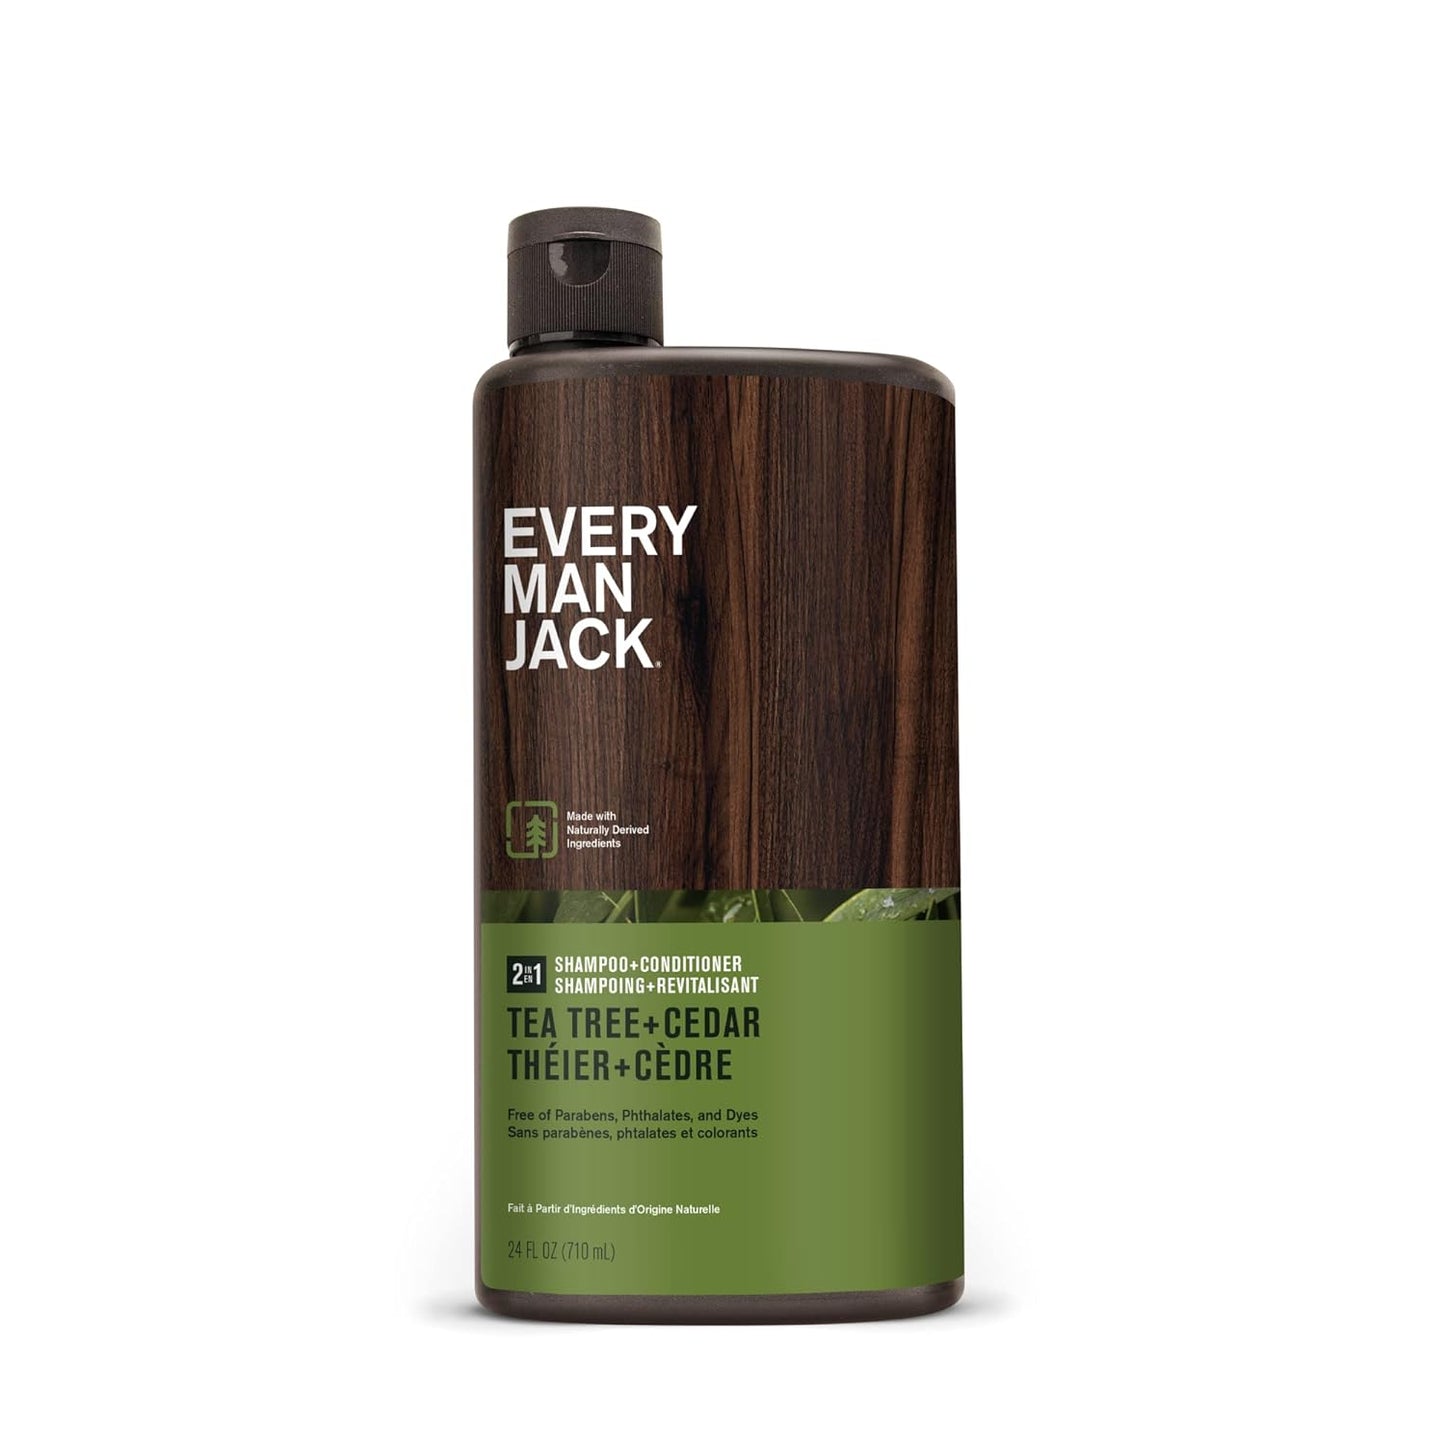 Every Man Jack 2-in-1 Daily Men's Shampoo + Conditioner / Tea Tree + Cedar / Naturally Derived and No Harmful Chemicals -24oz